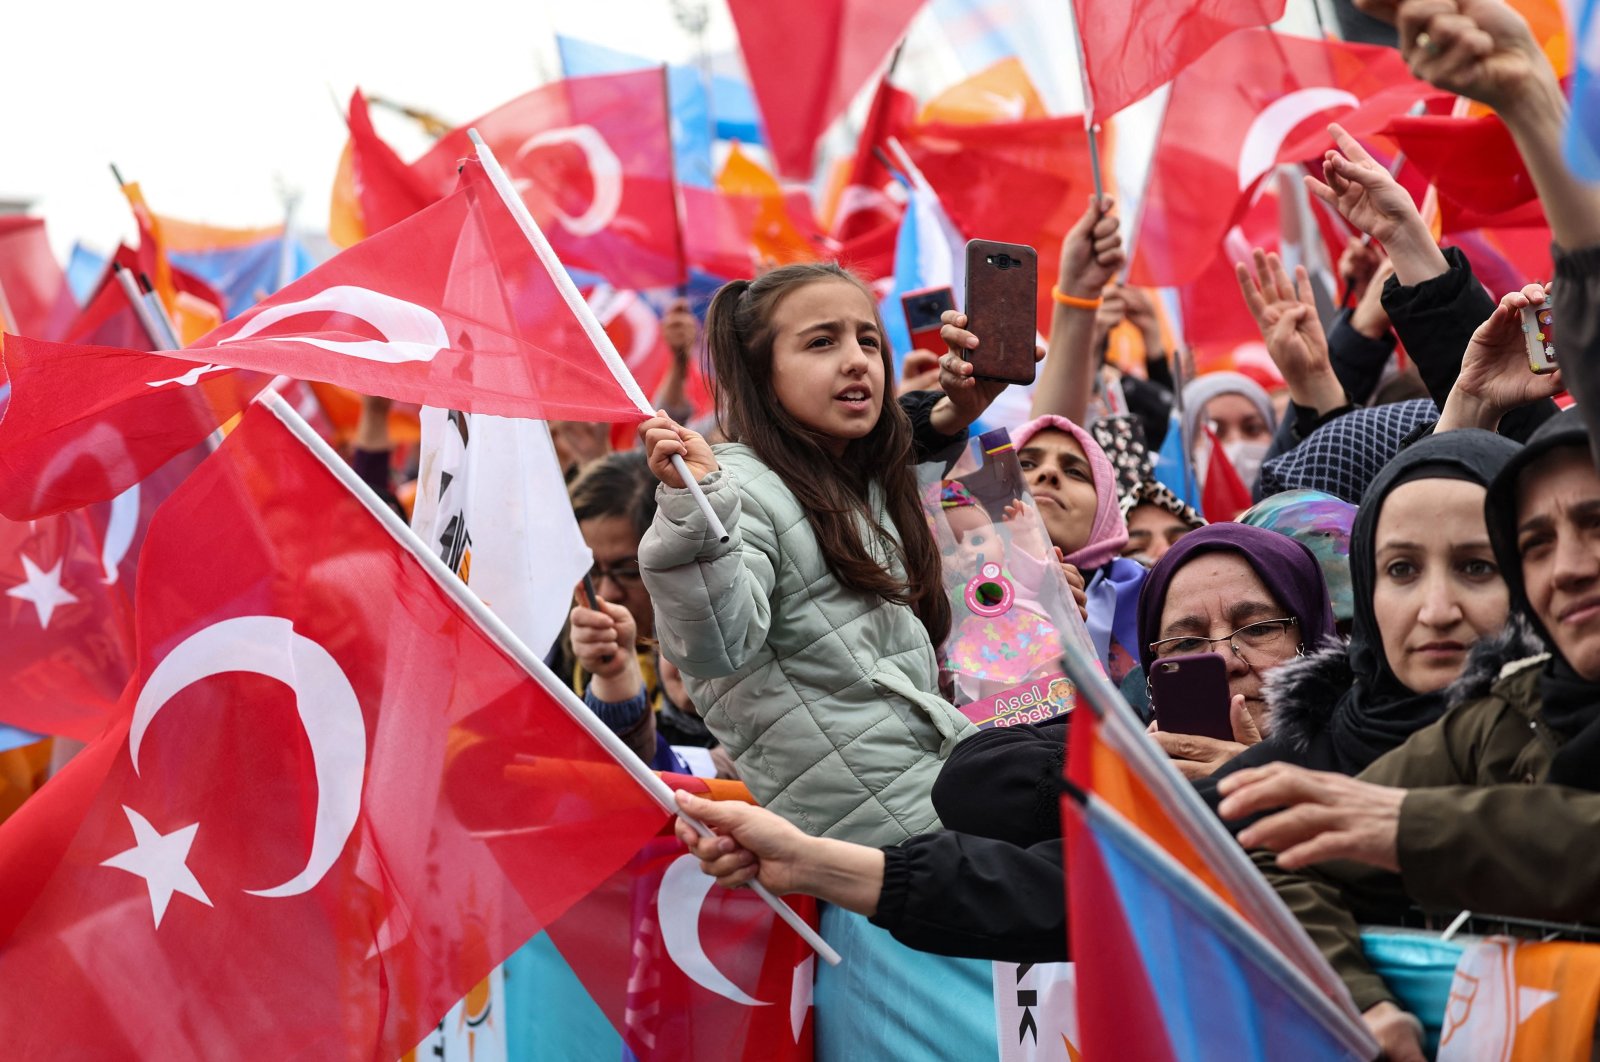 Supporters of President Recep Tayyip Erdoğan wave Turkish flags and cheer during his election campaign rally in Ankara, Türkiye, April 30, 2023. (AFP Photo)